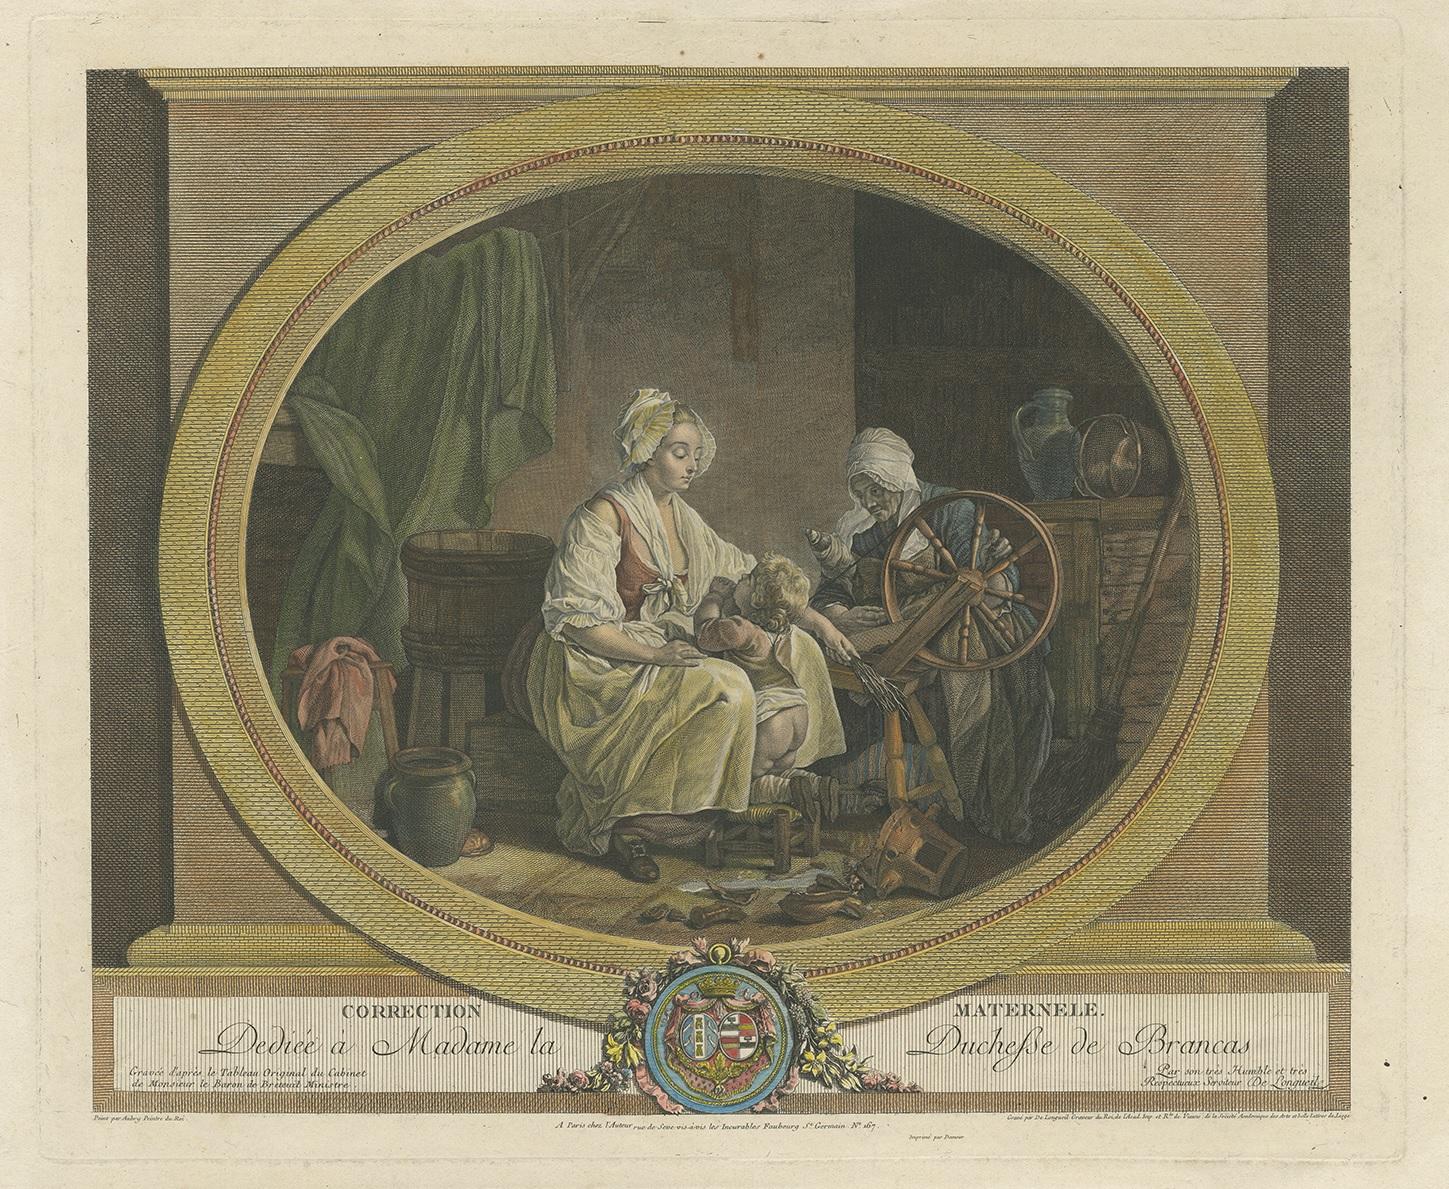 Antique print titled 'Correction Maternele Dediée à Madame la Duchesse de Brancas'. Antique engraving showing the punishment of a child. Behin the child, a spinning wheel can be seen. This print is engraved by Longueil after a painting by Aubry.